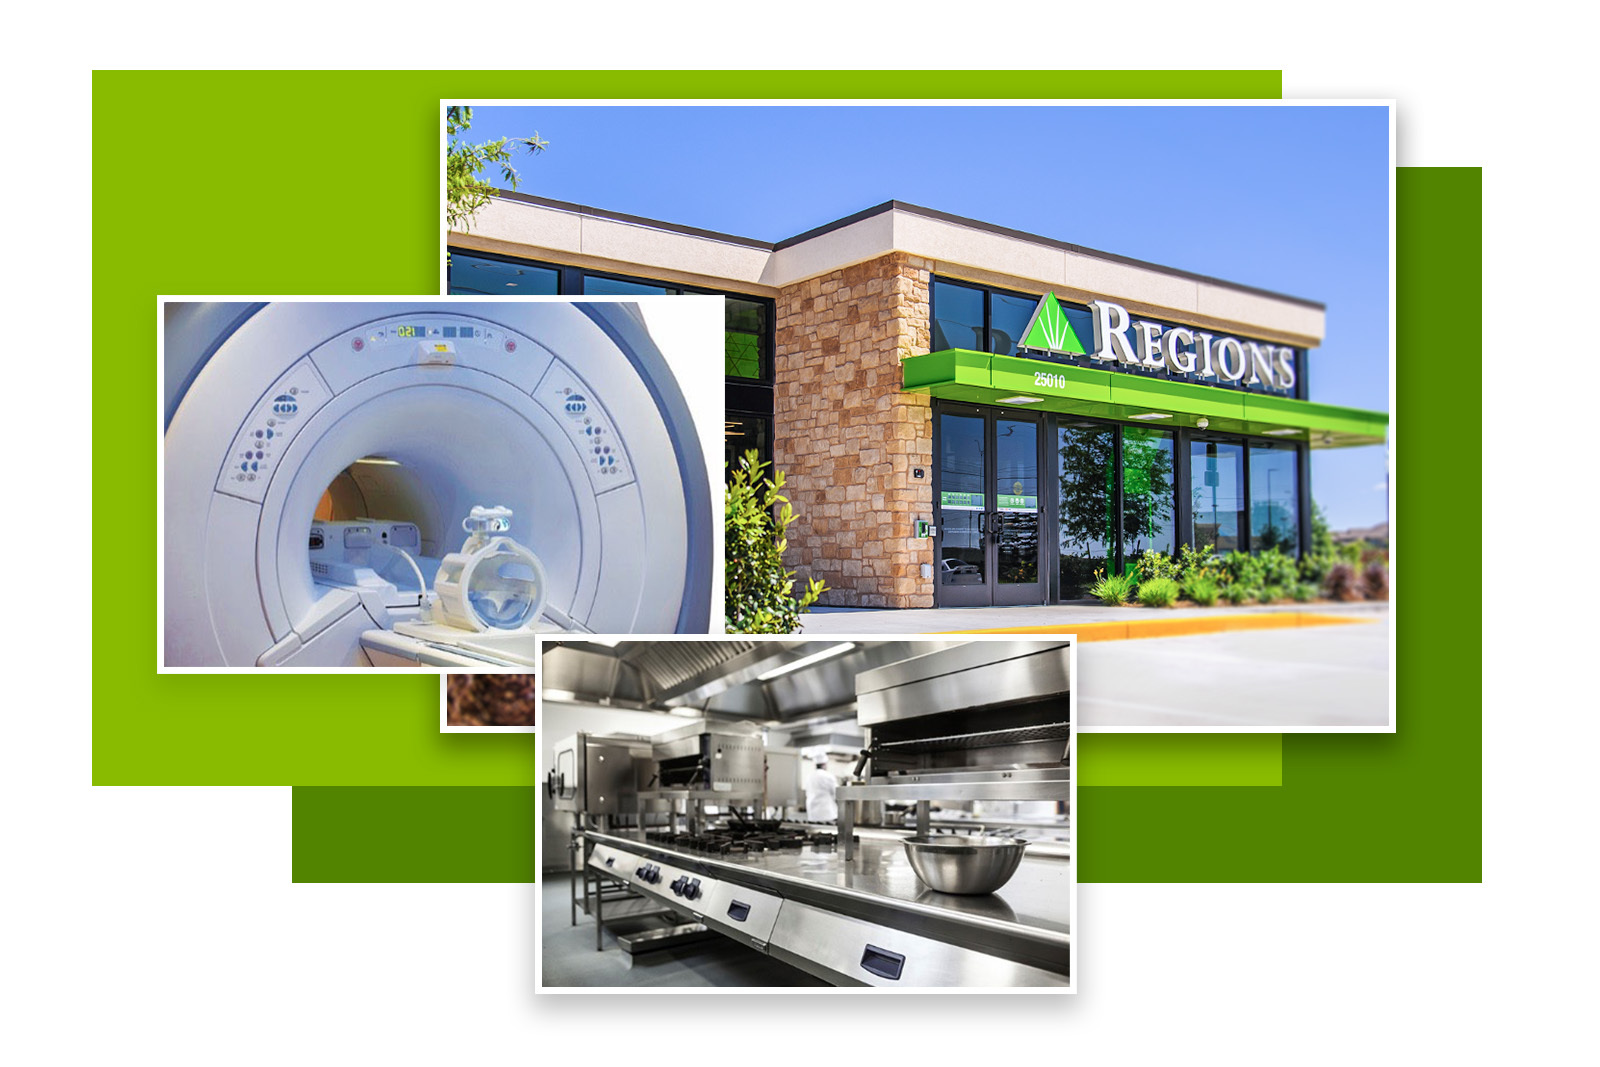 Regions bank branch and equipment images.